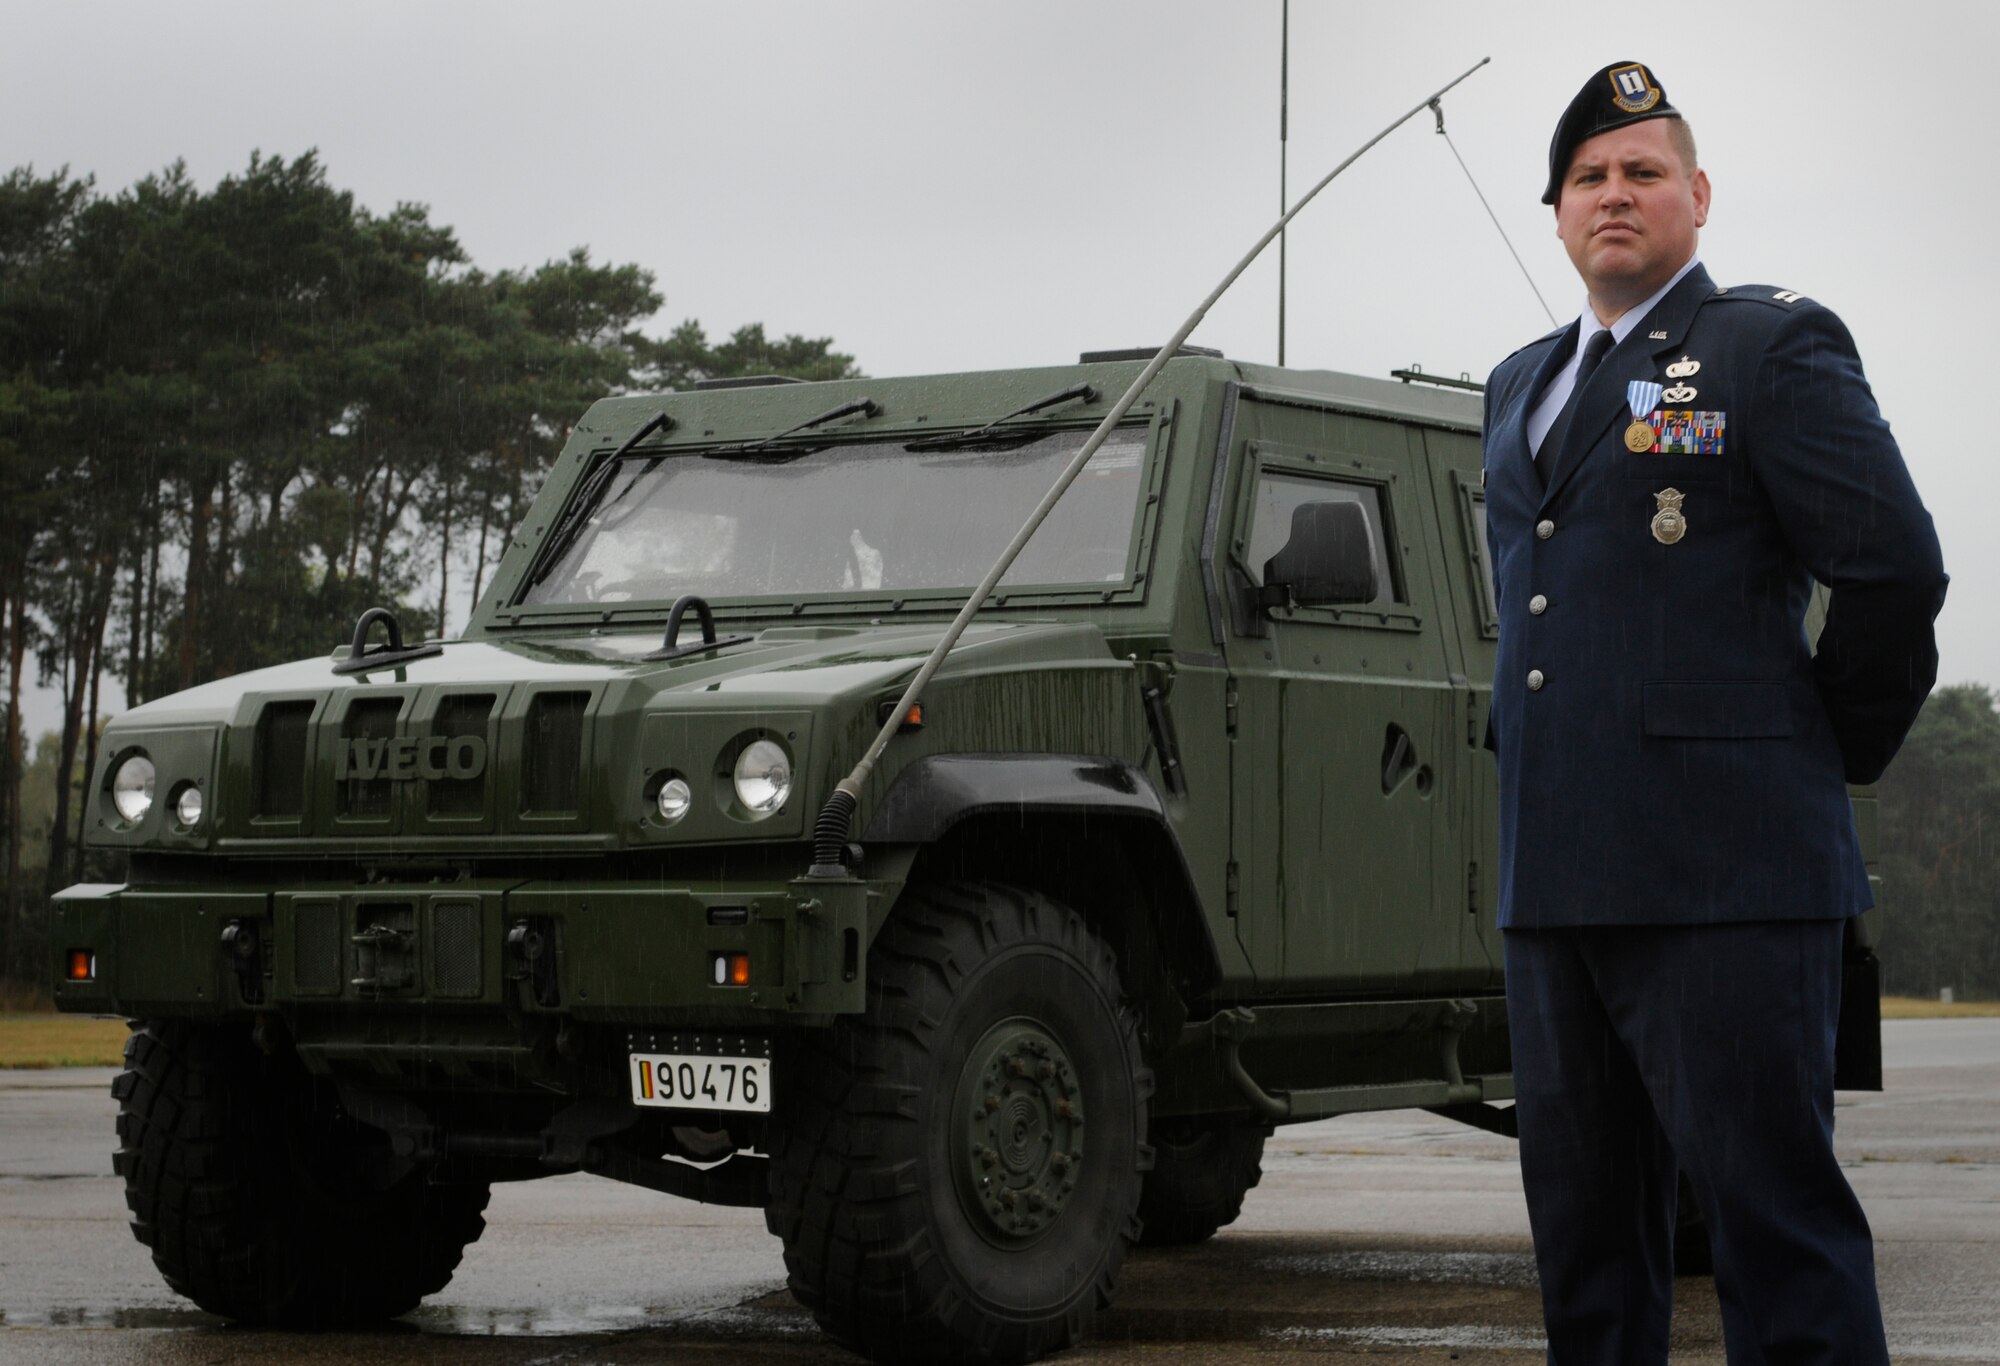 SPANGDAHLEM AIR BASE, Germany – Capt. Andrew Legault, 701st Munitions Support Squadron security forces commander, poses in front of a Belgian light multi-role vehicle after being awarded the Belgian Meritorious Medal Sept. 1. Captain Legault received the medal for outstanding efforts resulting in excellent ratings during the most recent weapons inspection at Kleine Brogel Air Base, Belgium. (U.S. Air Force photo/Senior Airman Benjamin Wilson)